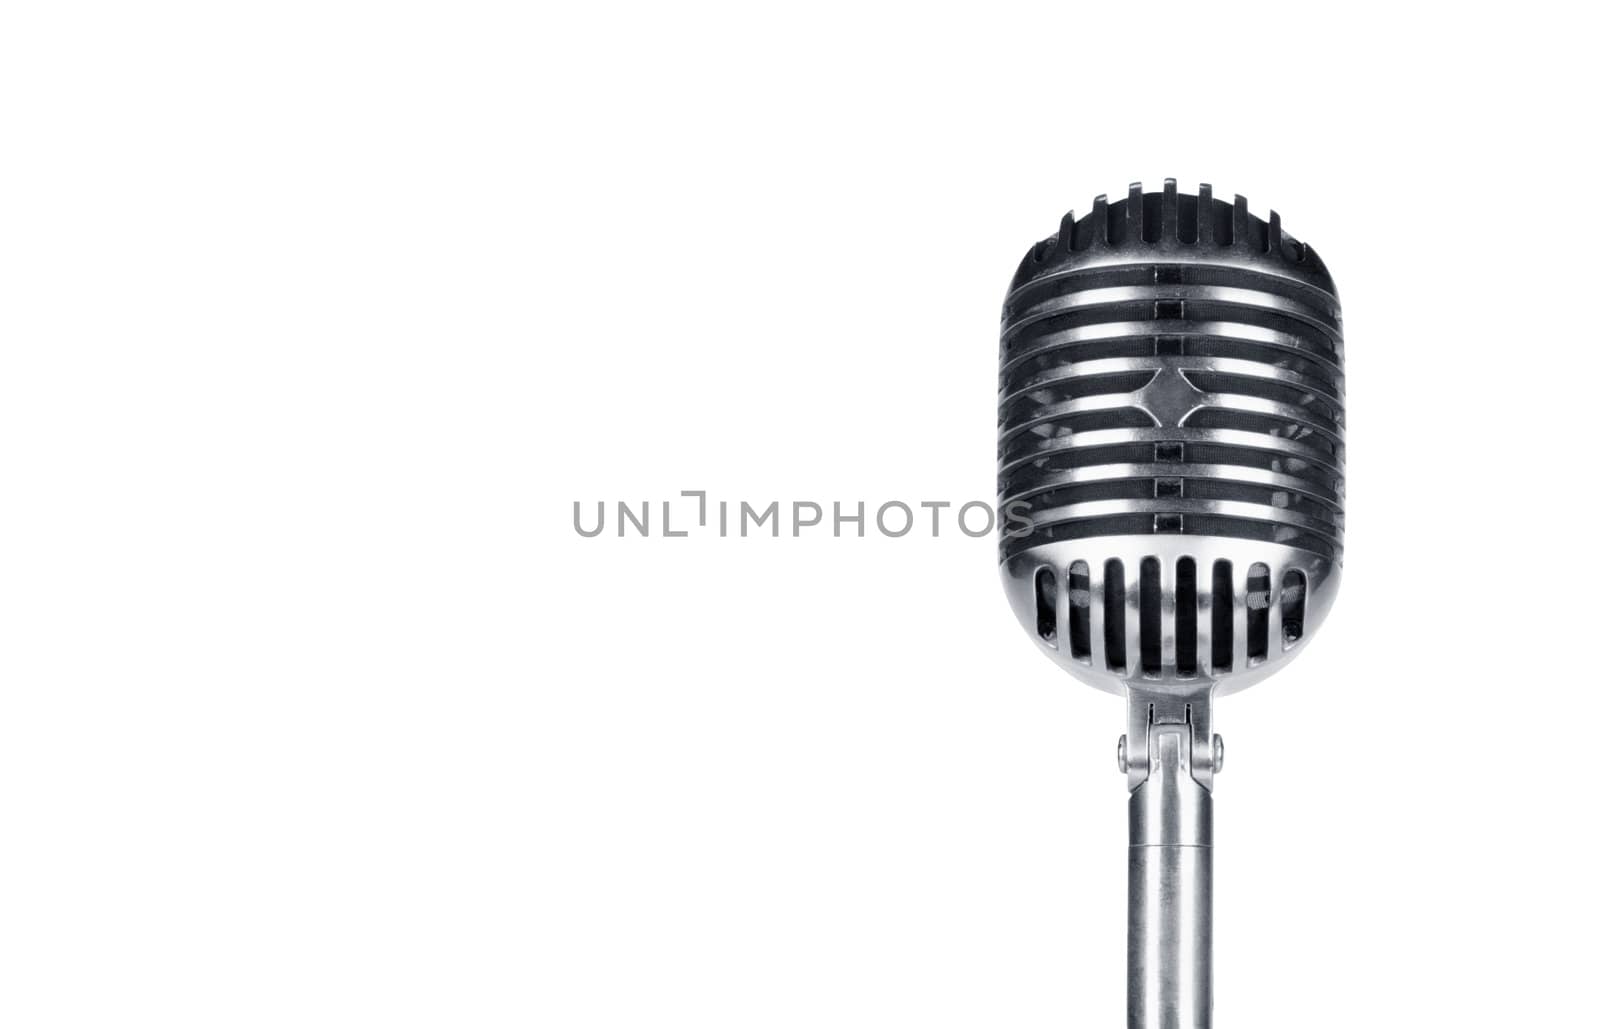 Retro microphone isolated on the white background